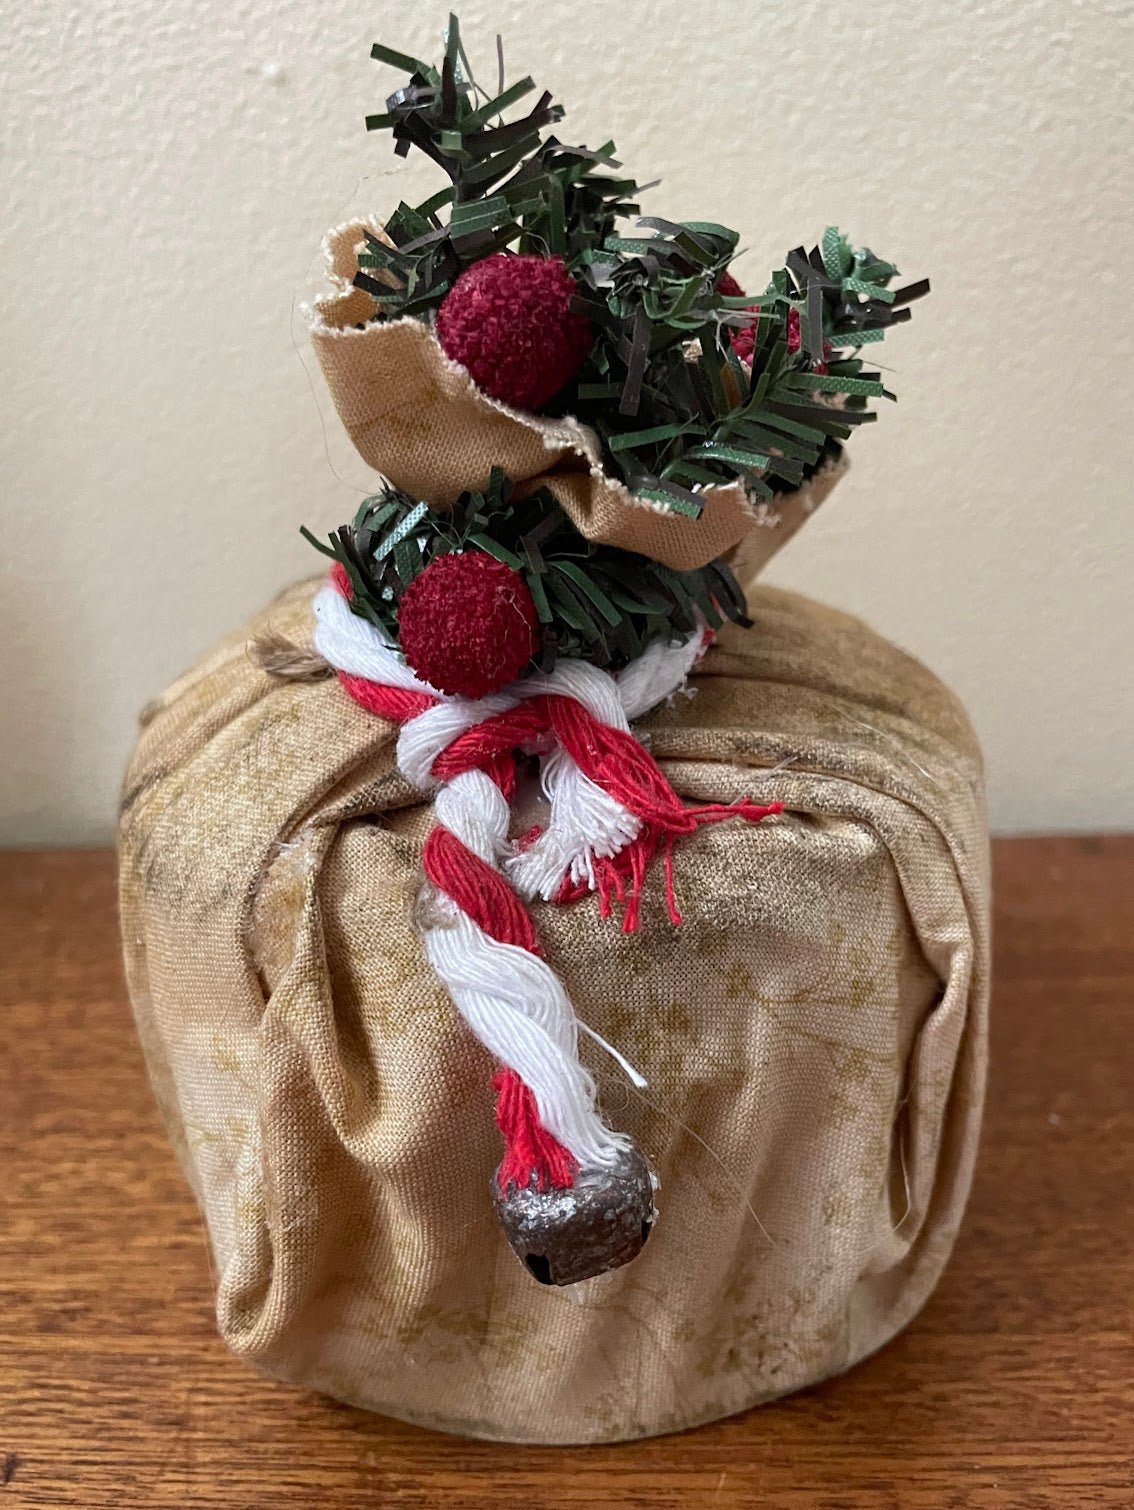 Primitive Colonial Handcrafted Fabric Holiday Bundle Christmas Gift Box Display - The Primitive Pineapple Collection